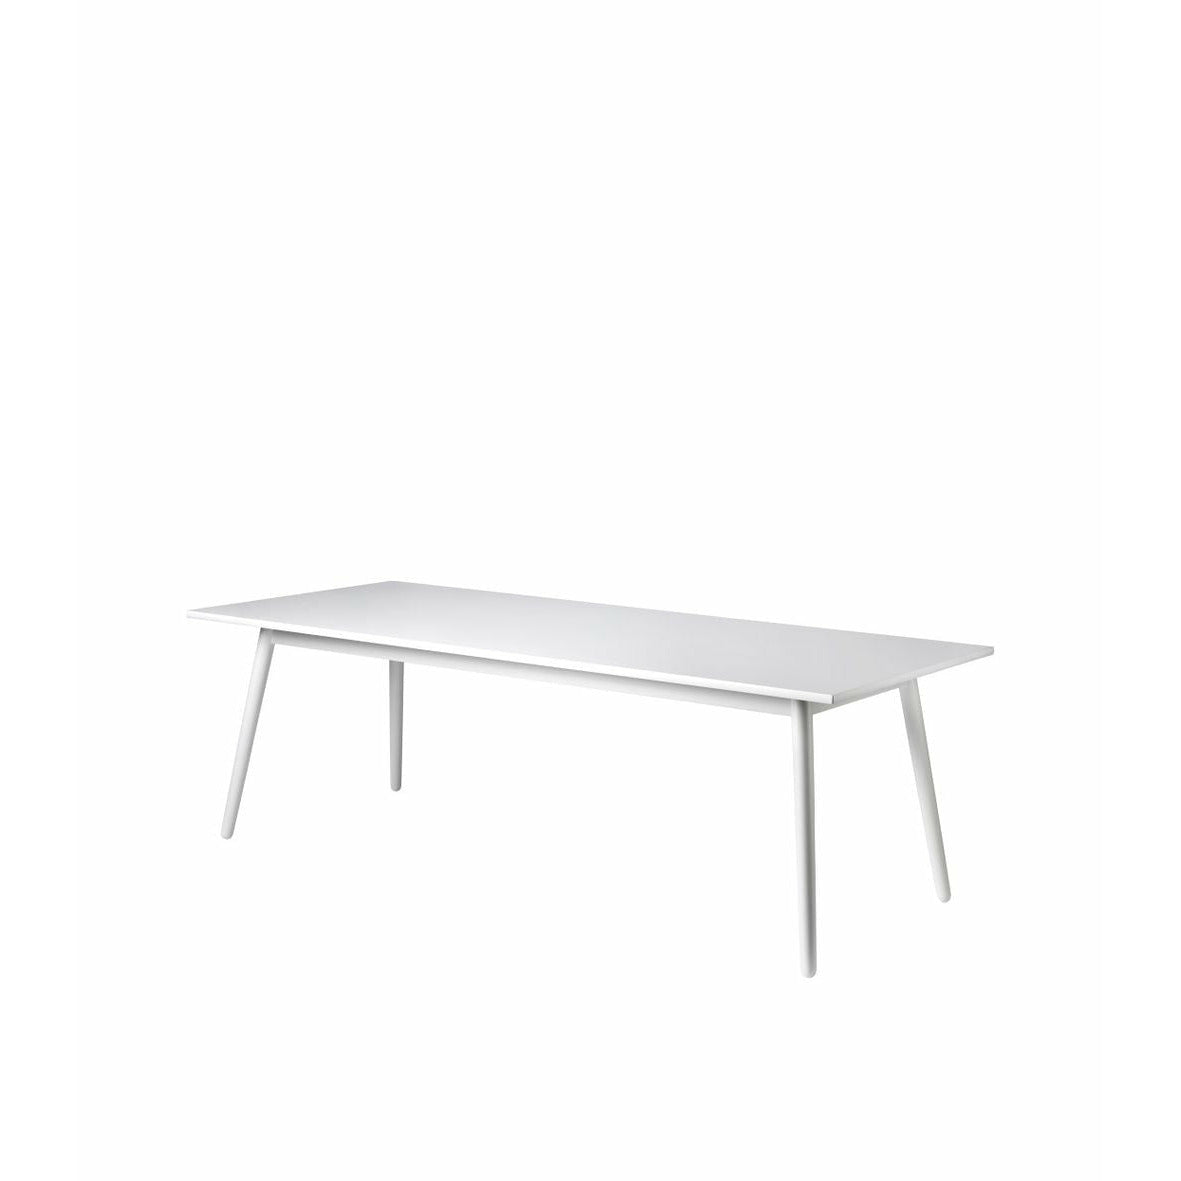 Fdb Møbler C35 C Dining Table, White (Ral 9010)